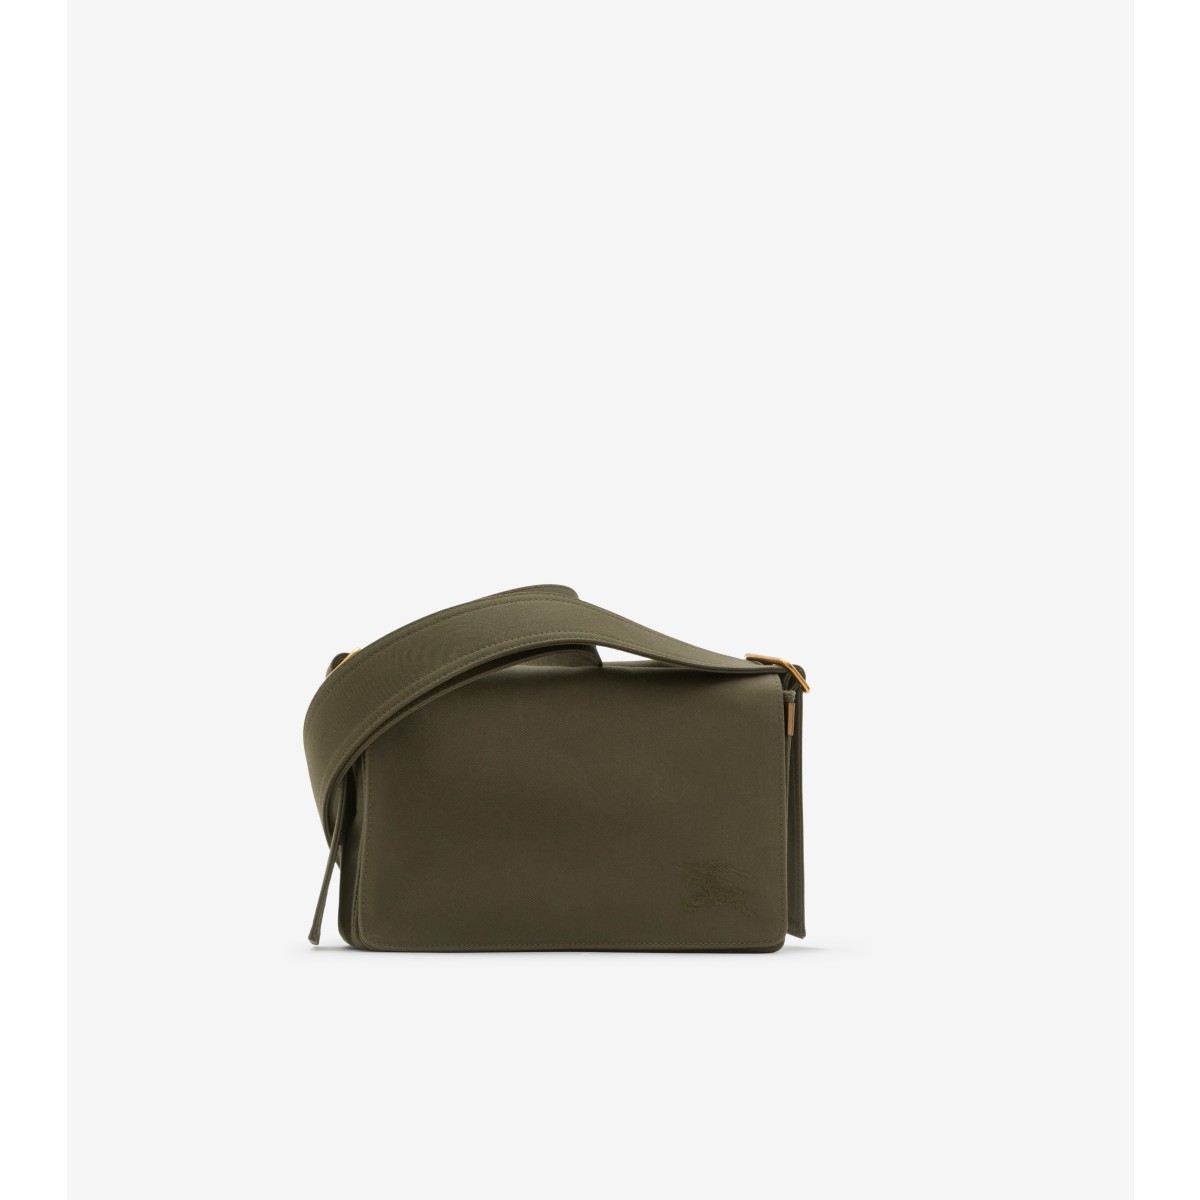 Burberry Trench Crossbody Bag In Olive